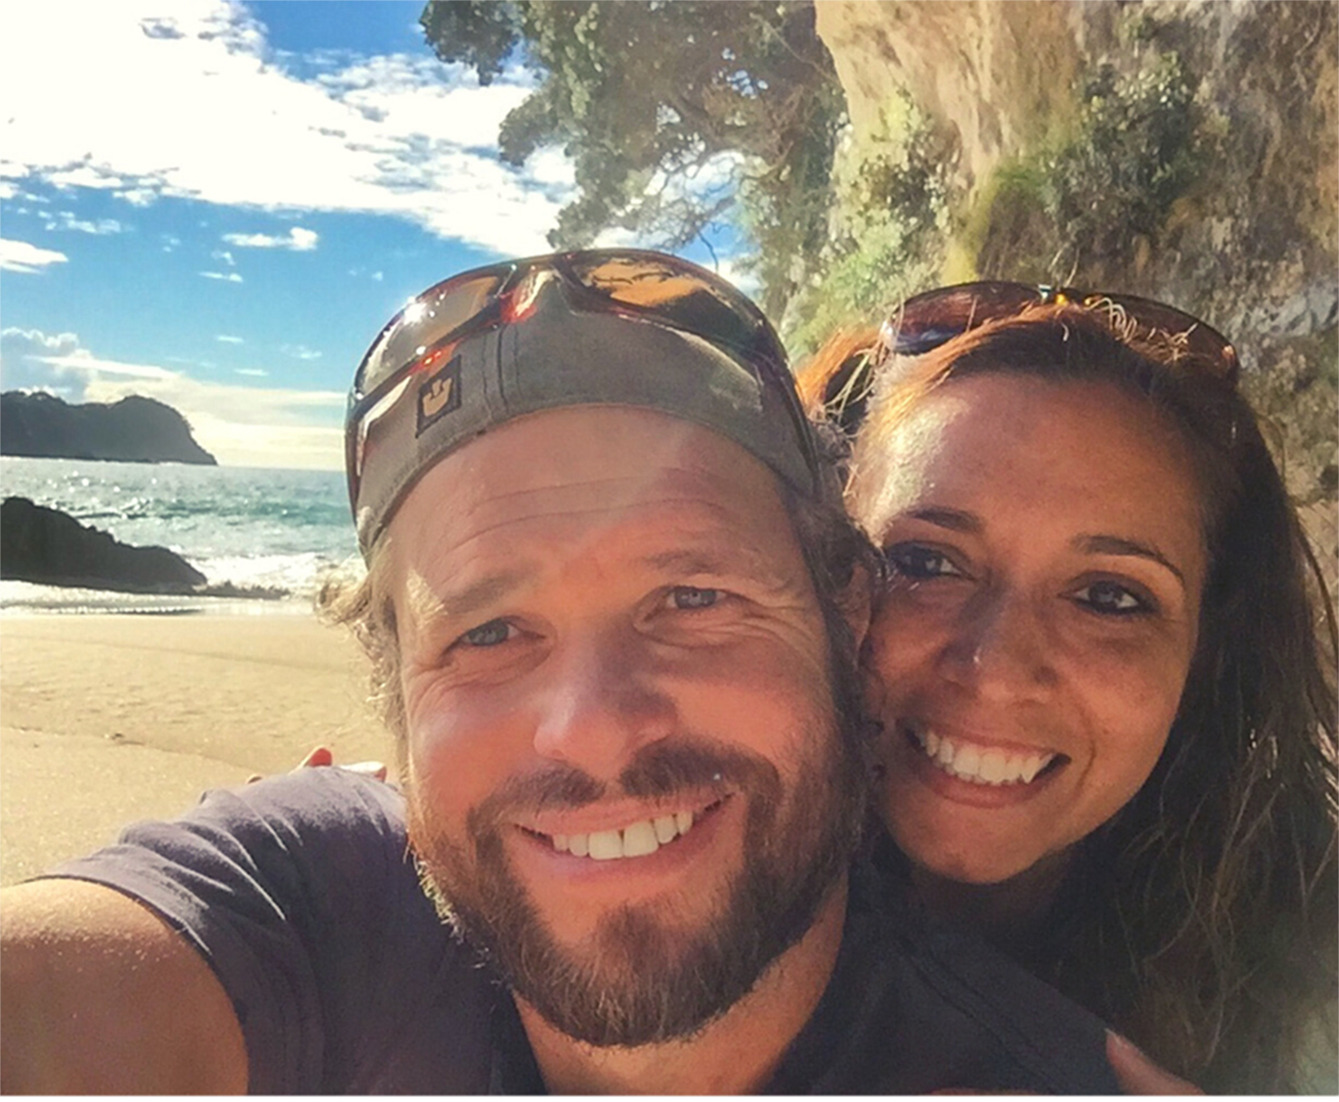 Beach Fuck Uncensored - Kiwi mum and dad's crusade against porn: Rob Cope and Zareen Sheikh-Cope  make documentary on what our kids watch online - NZ Herald